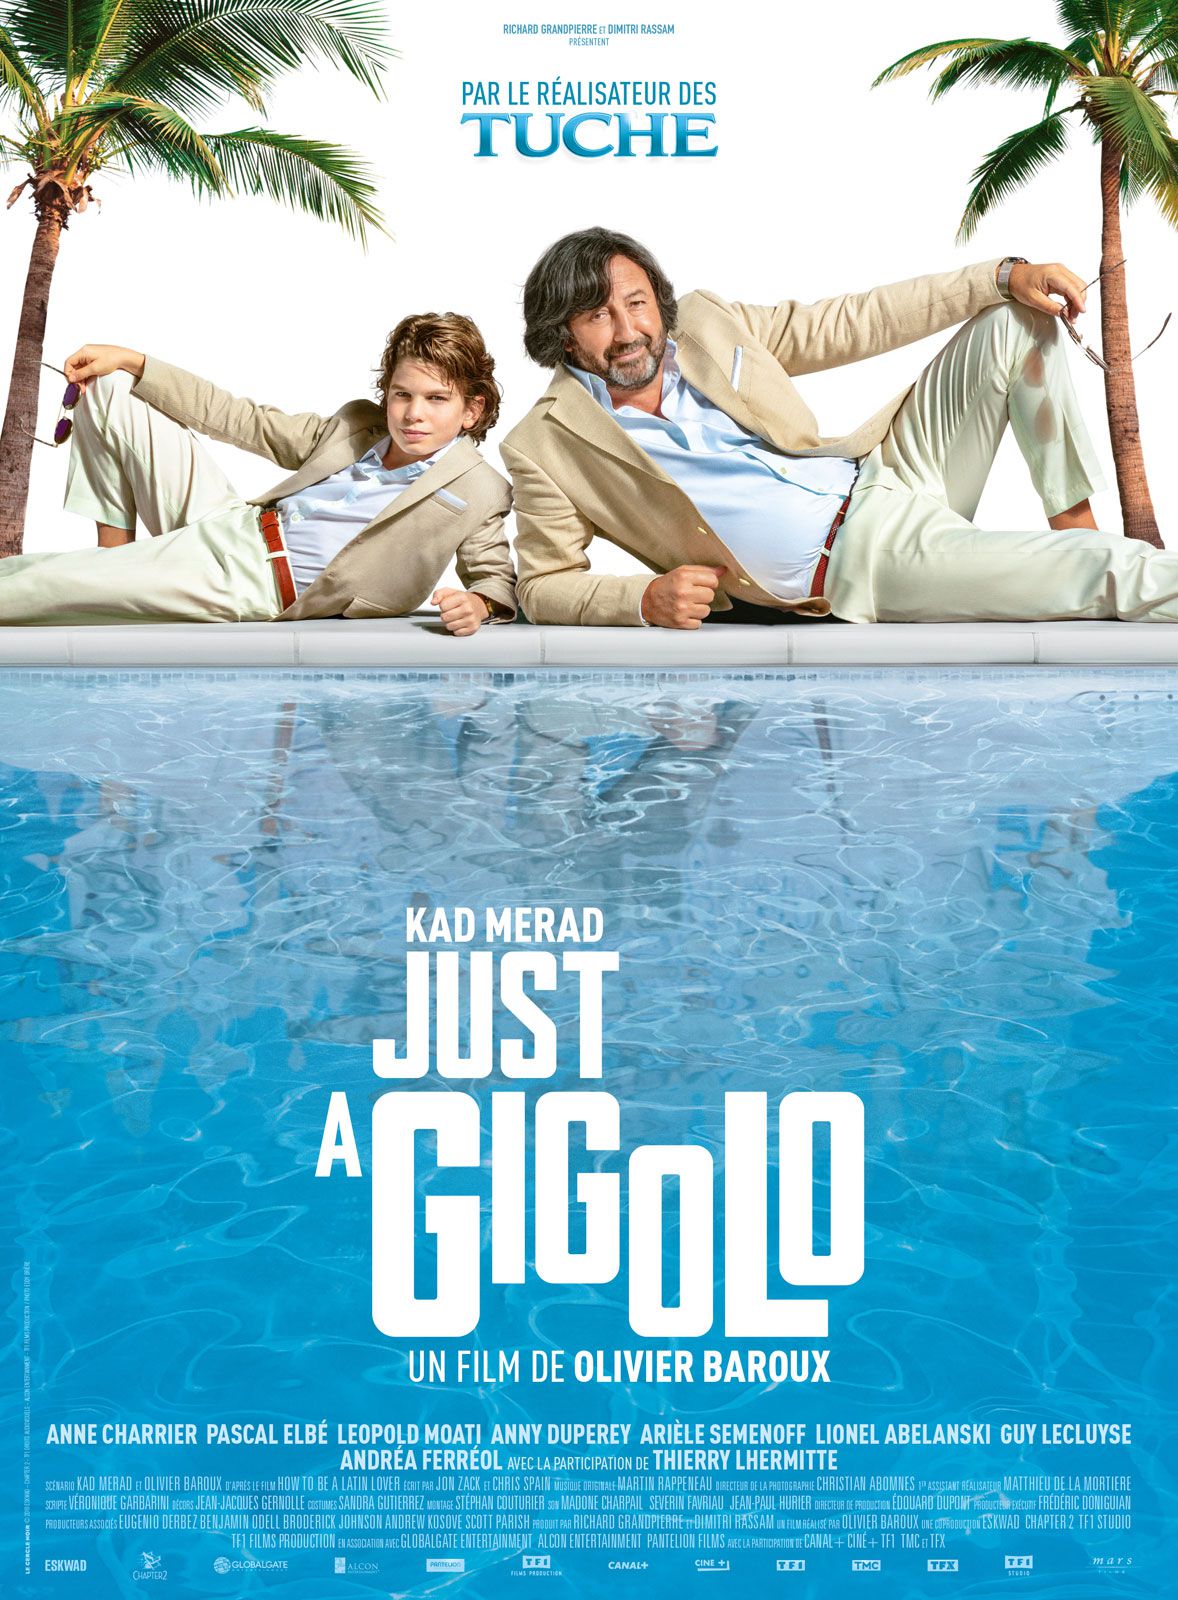 Just a Gigolo - Film (2019) streaming VF gratuit complet